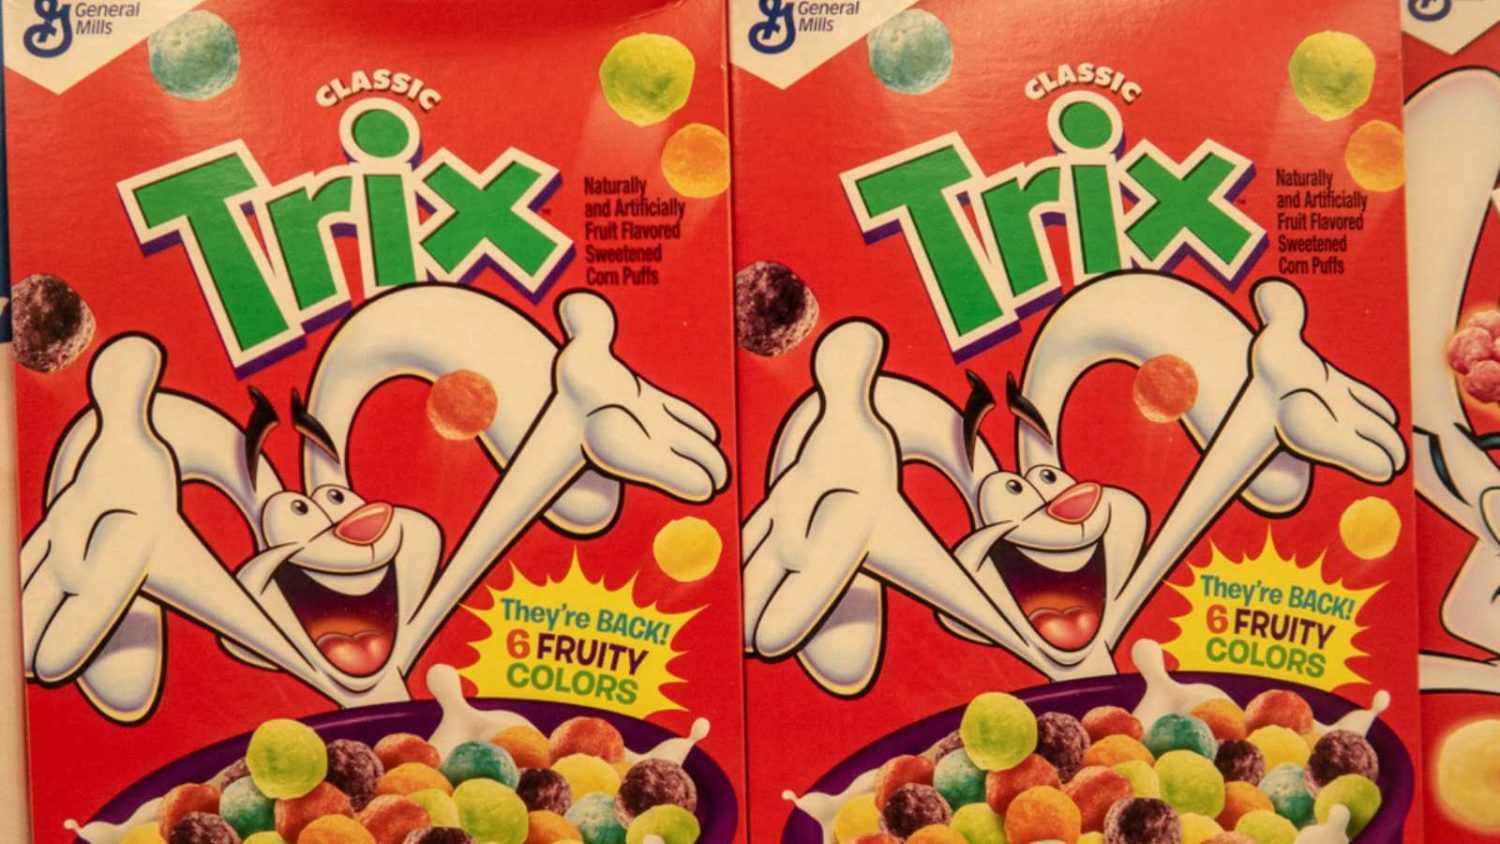 Aliso Viejo, CA / USA - 11/18/2018: General Mills Trix Cereal on Display at a Local Grocery Store